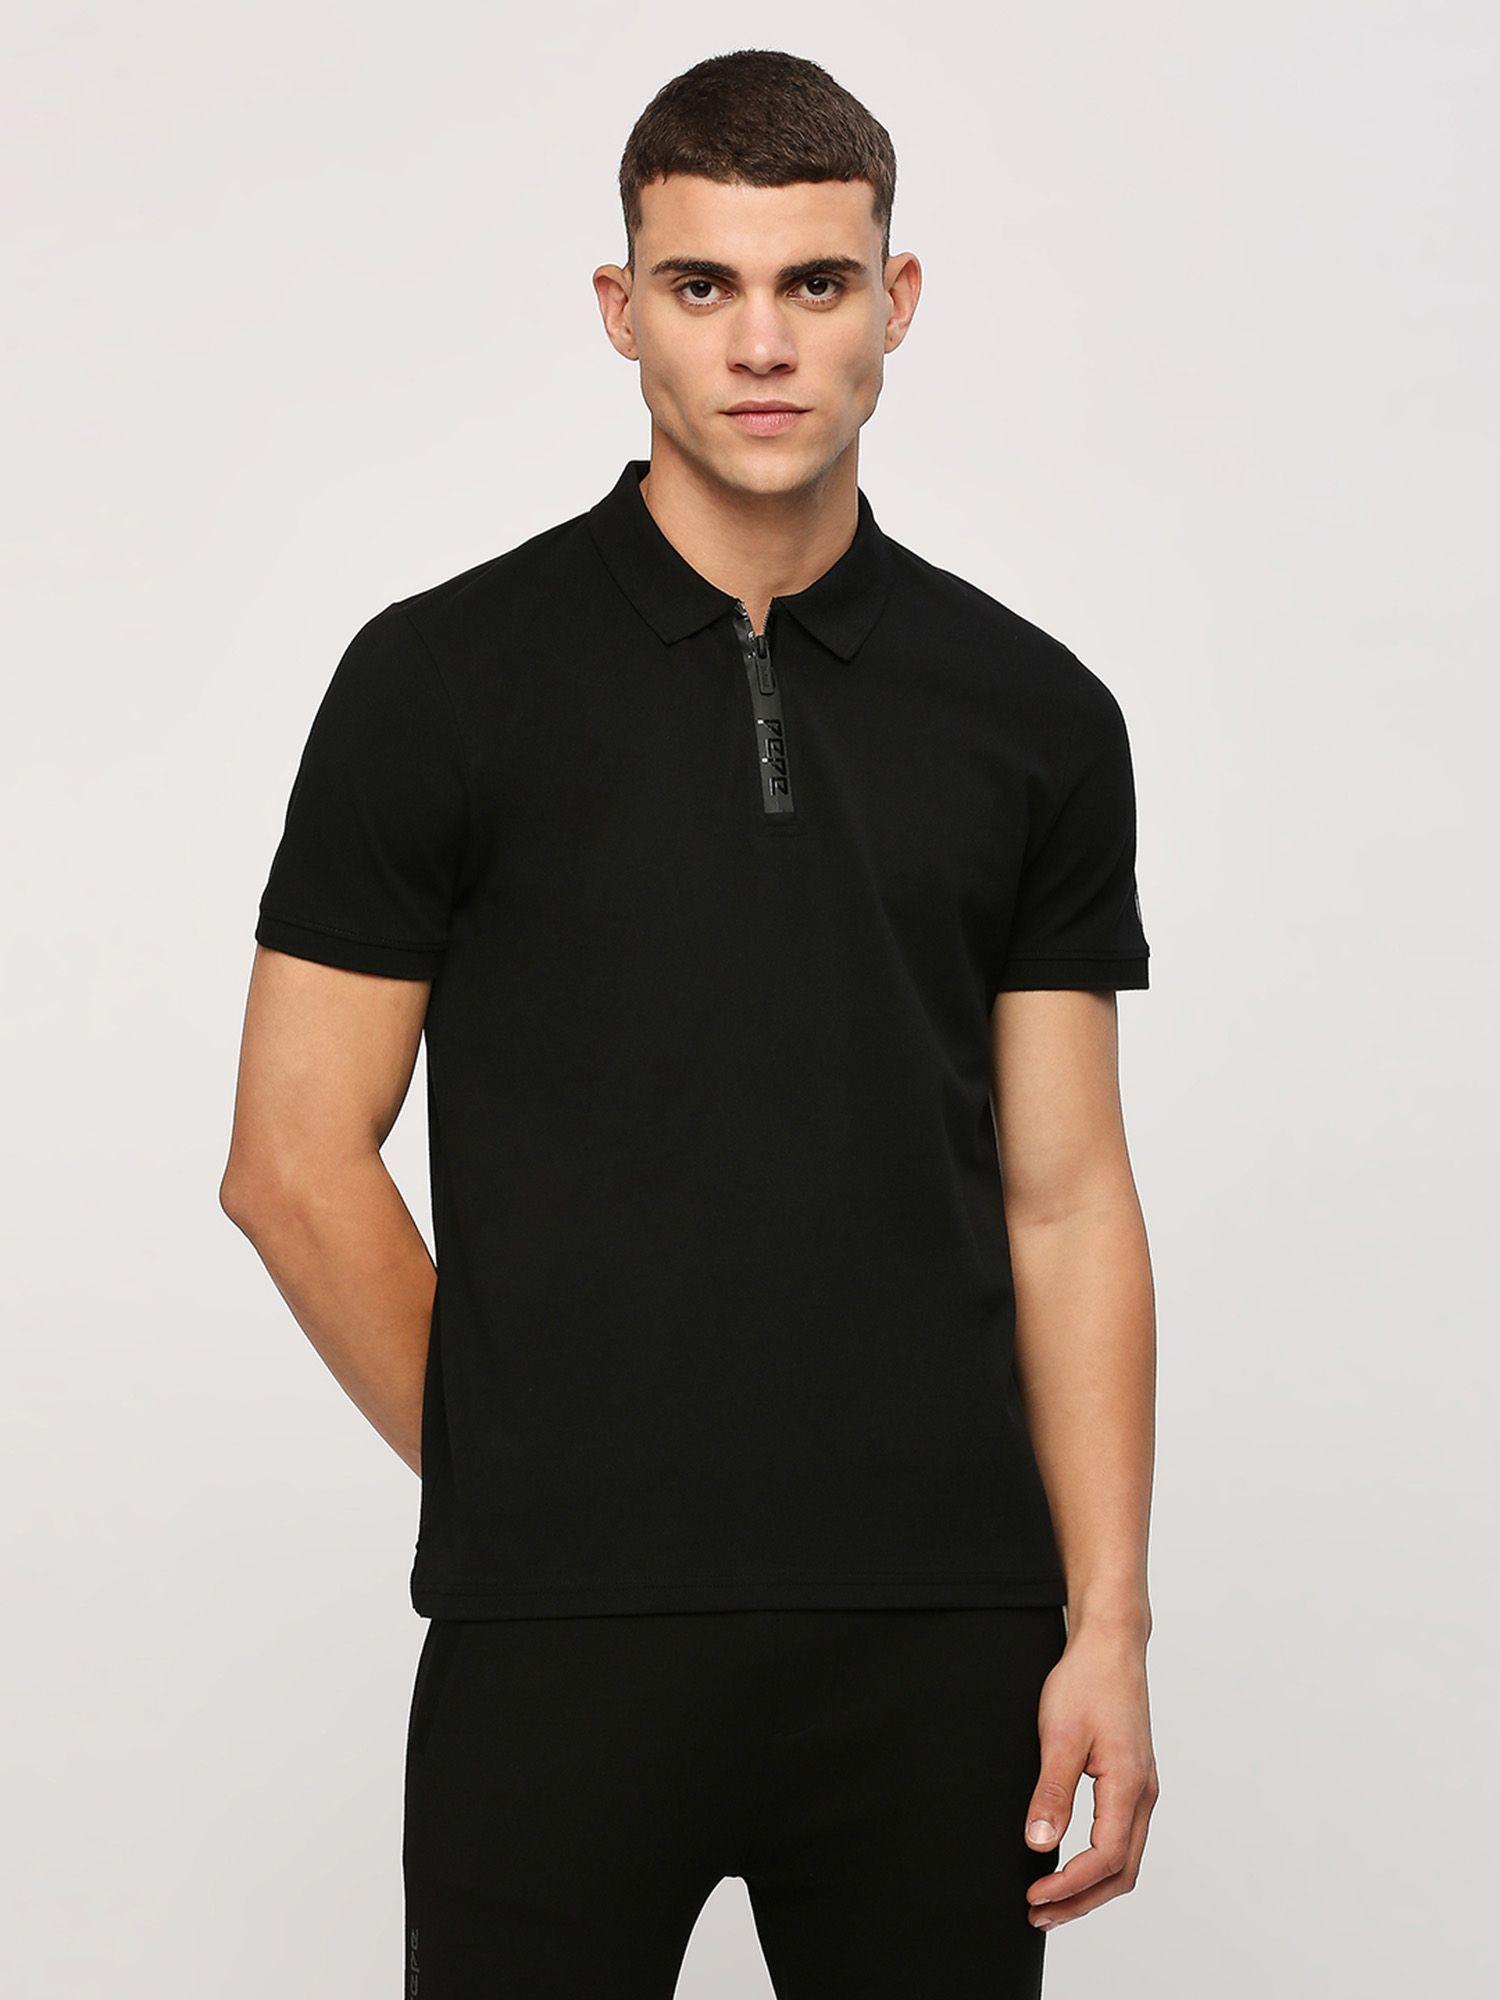 black-solid-neck-short-sleeves-polo-t-shirt